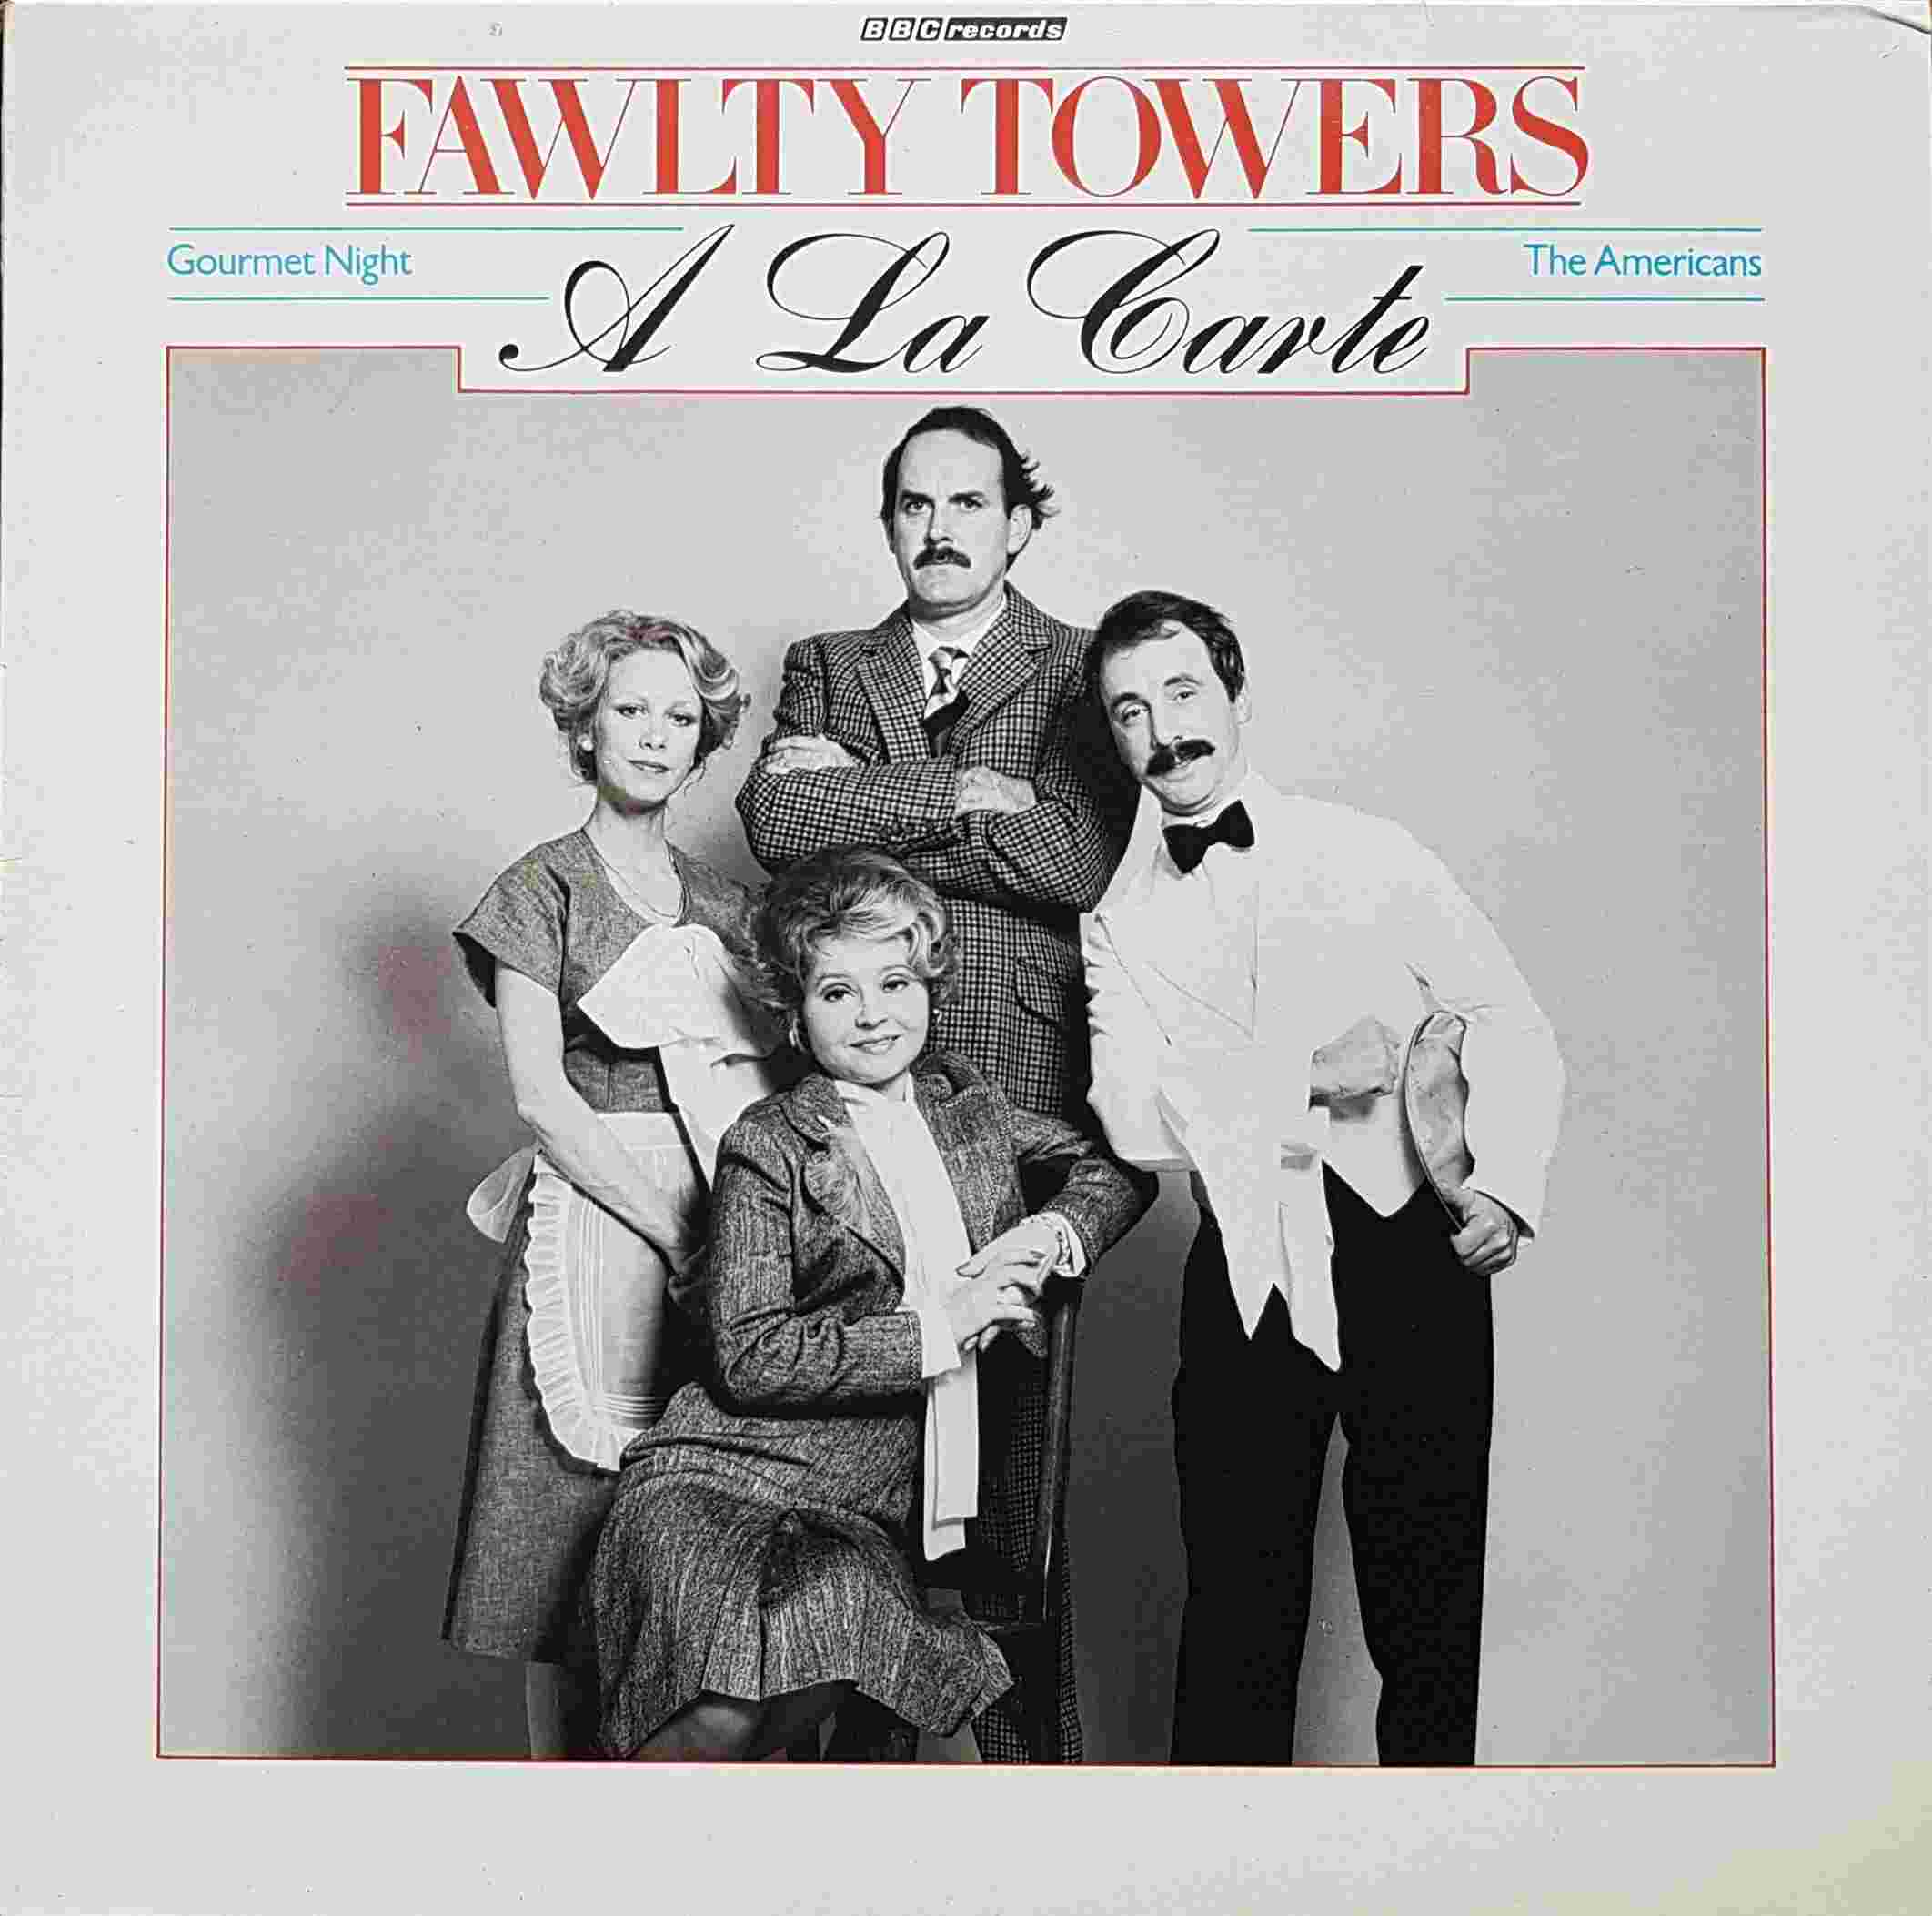 Picture of REB 484 Fawlty Towers - A la carte by artist John Cleese / Connie Booth from the BBC albums - Records and Tapes library